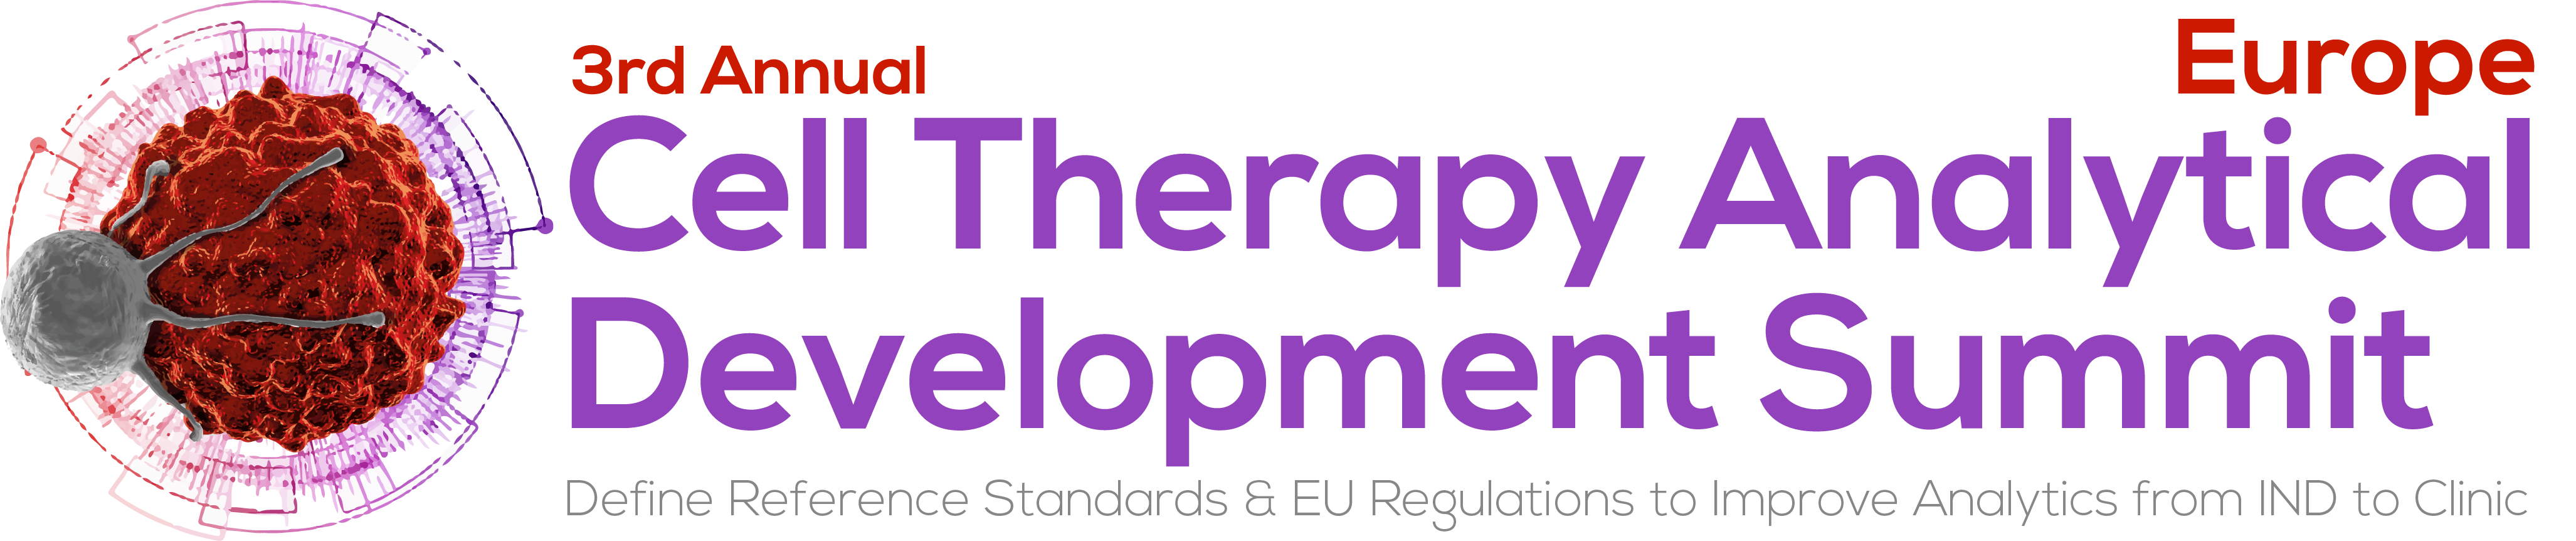 3rd Annual Celll Therapy Analytical Development Summit Europe (1)